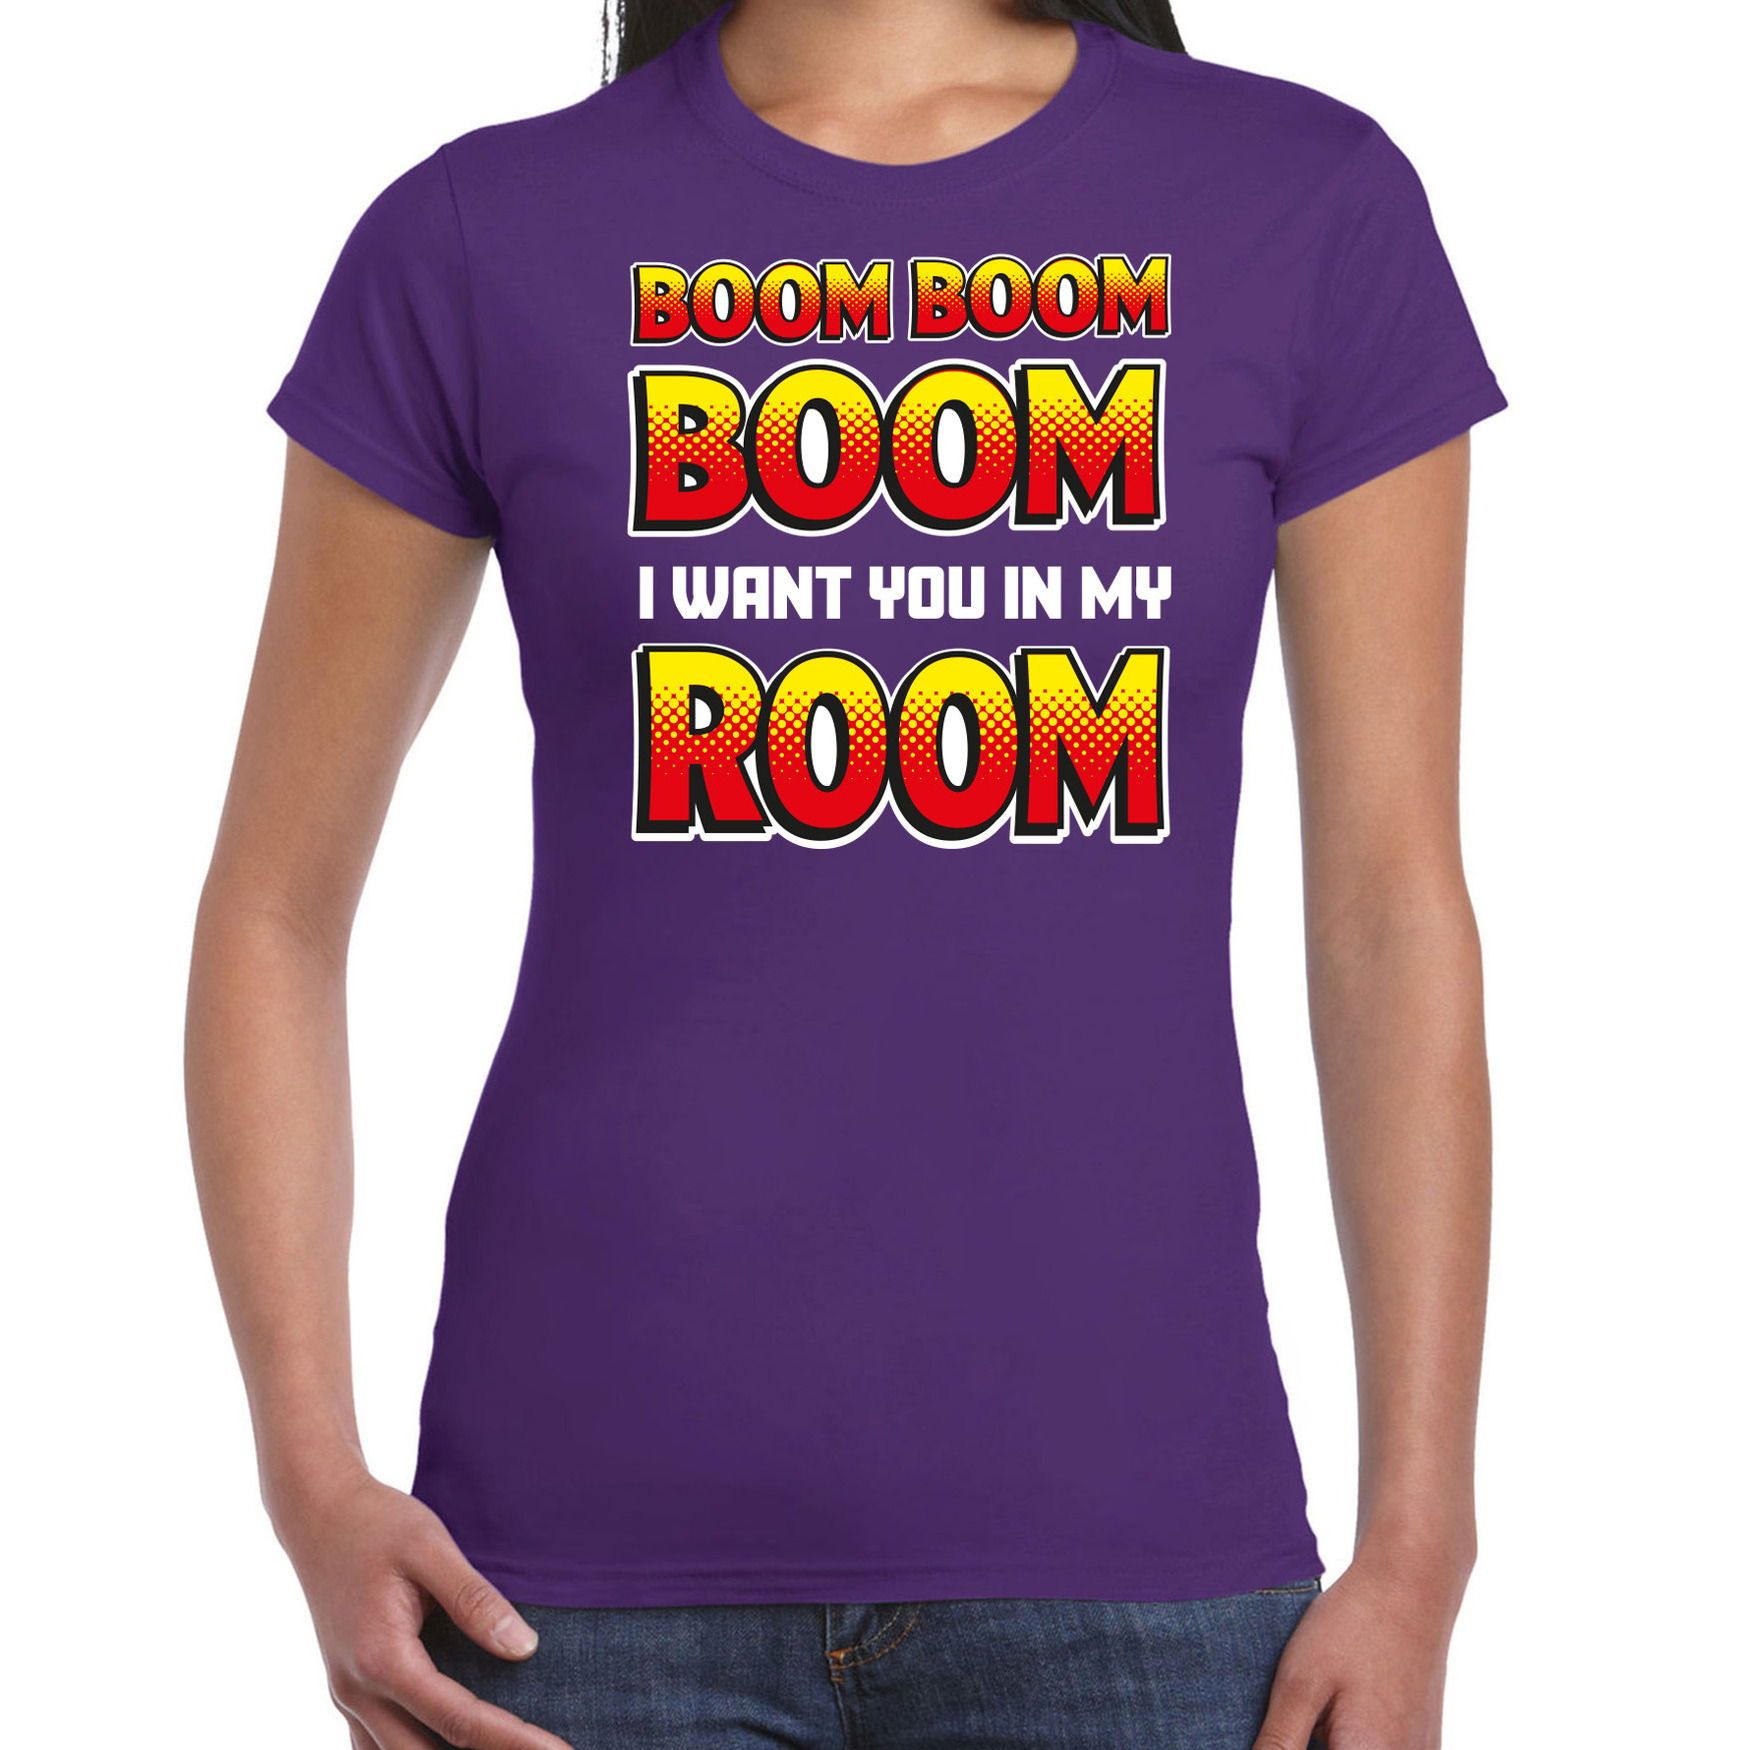 Foute party t-shirt voor dames Boom boom boom i want you in my room paars carnaval-themafeest